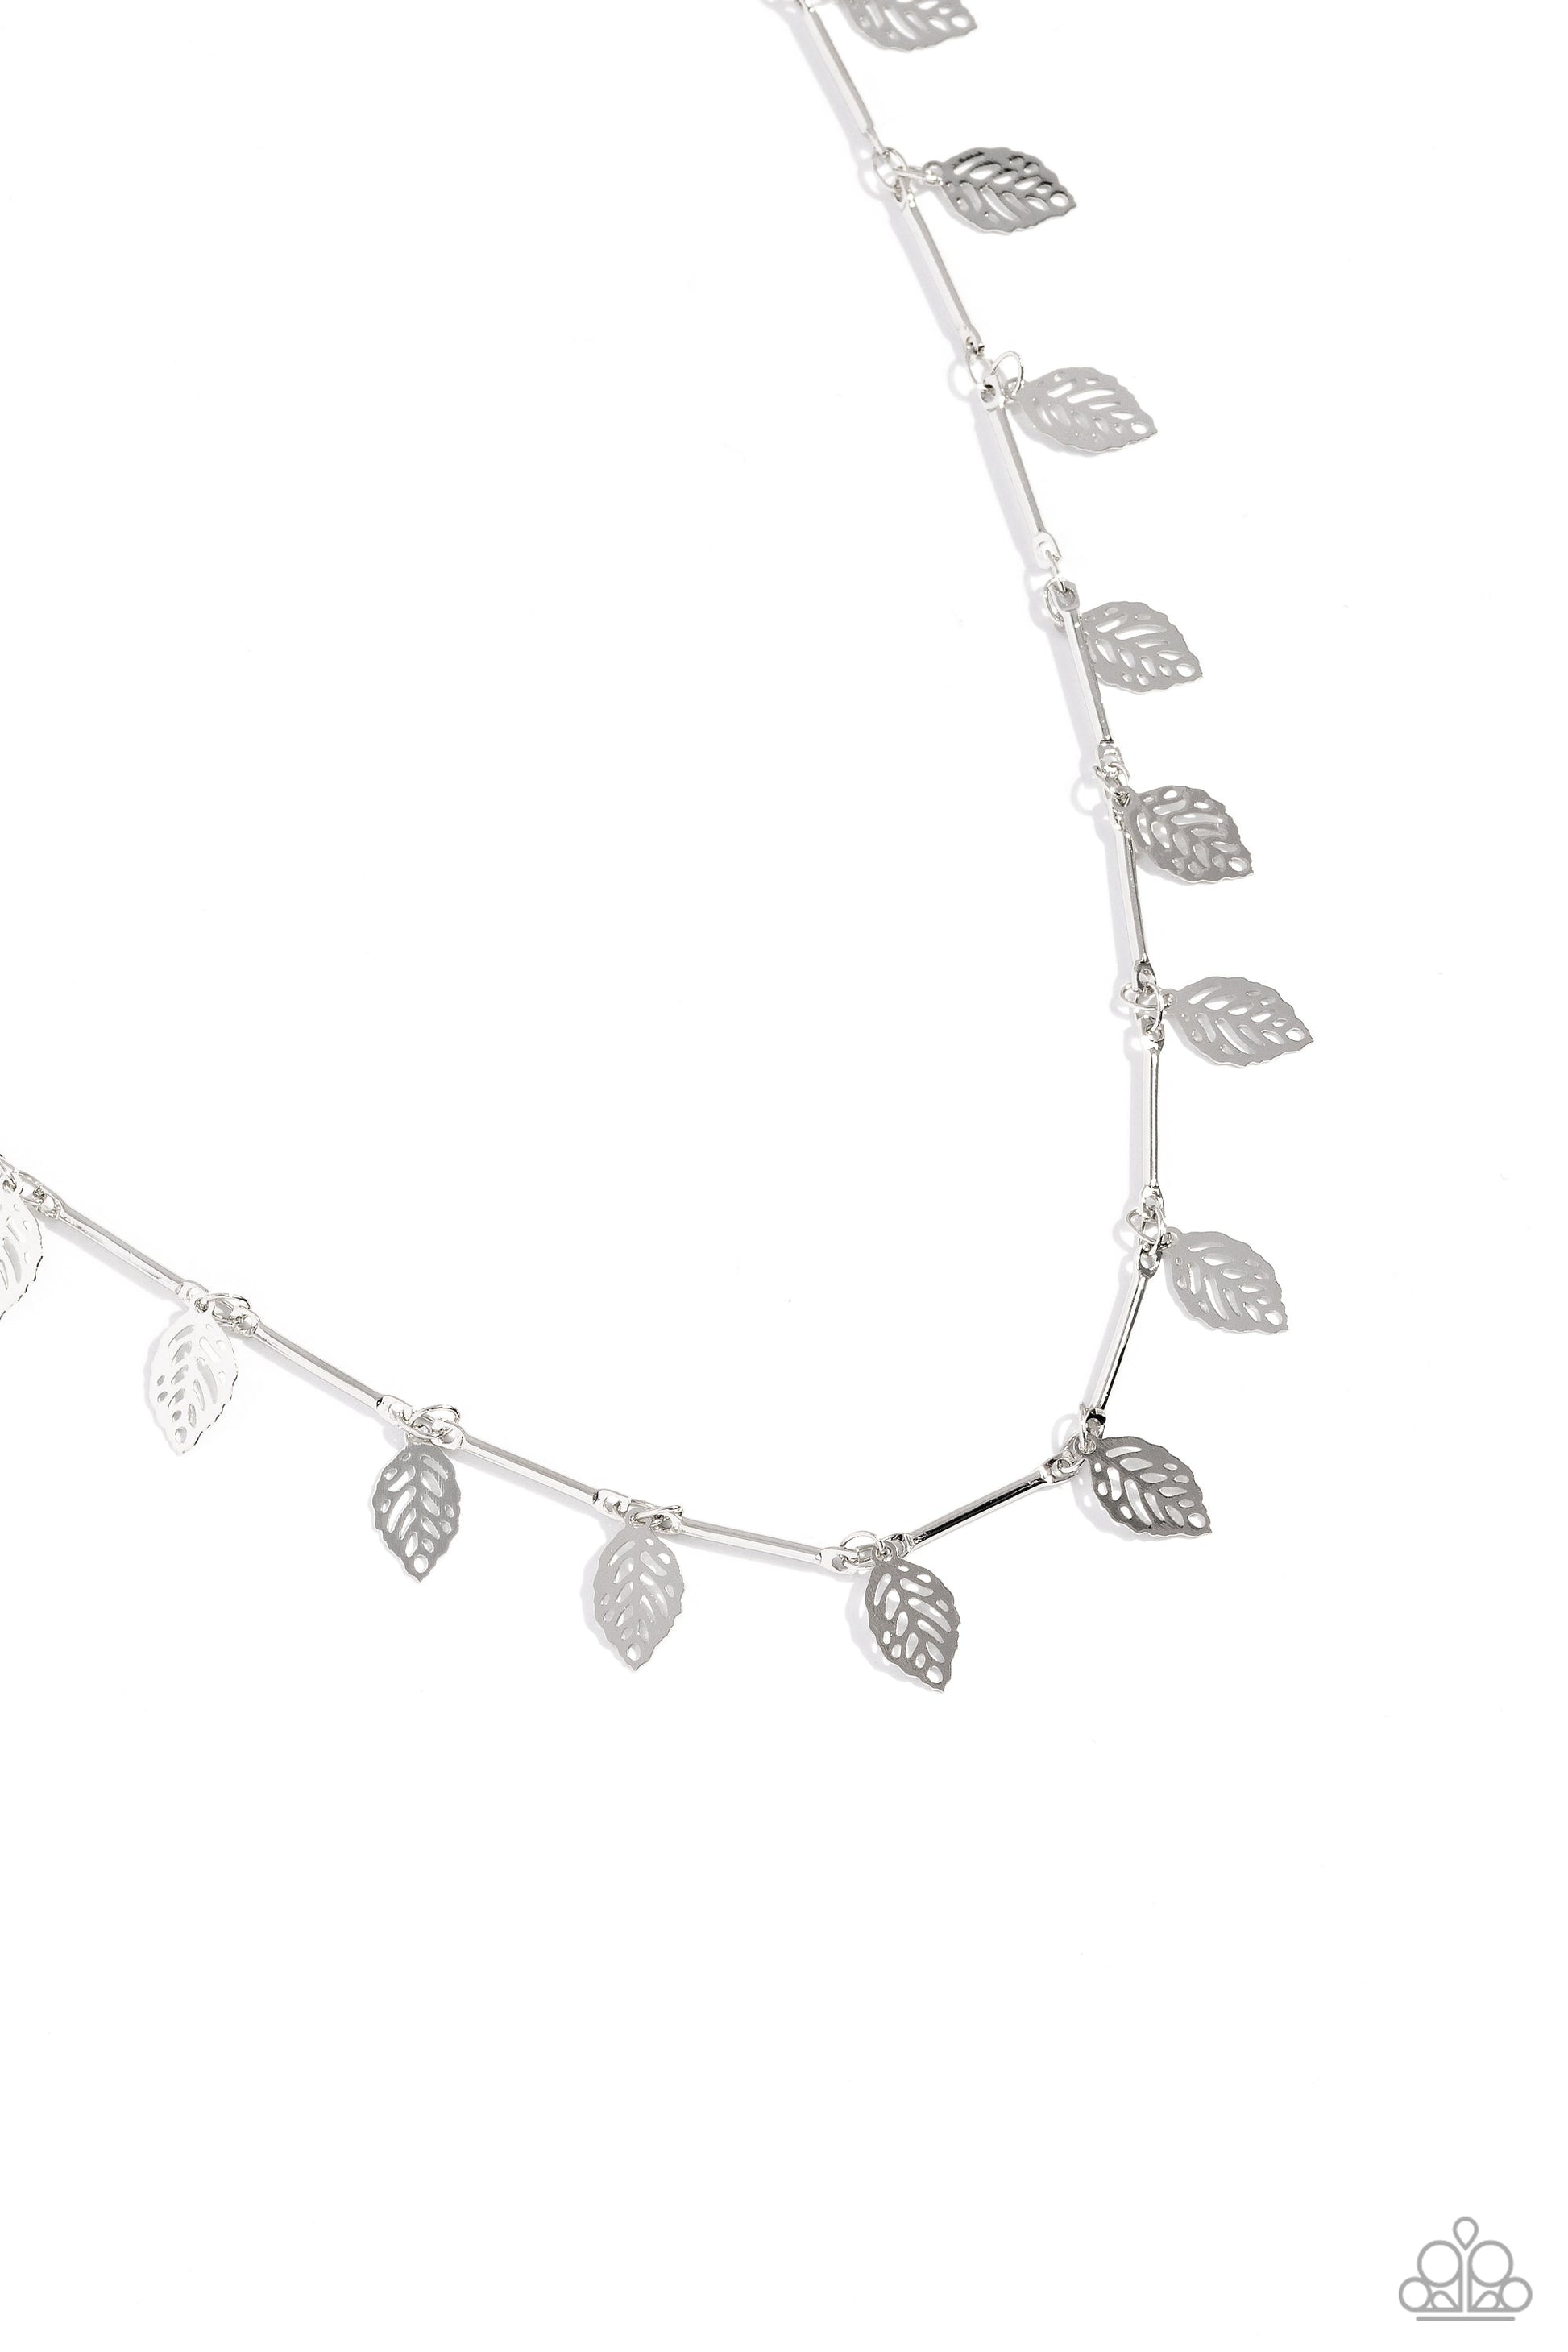 LEAF a Light On - Silver Necklace - Paparazzi Accessories - Skinny silver bars link together along the collar to create a dainty display of metallic sheen. A shiny silver leaf separates each bar, bringing shimmery movement to the lightweight design. Features an adjustable clasp closure.